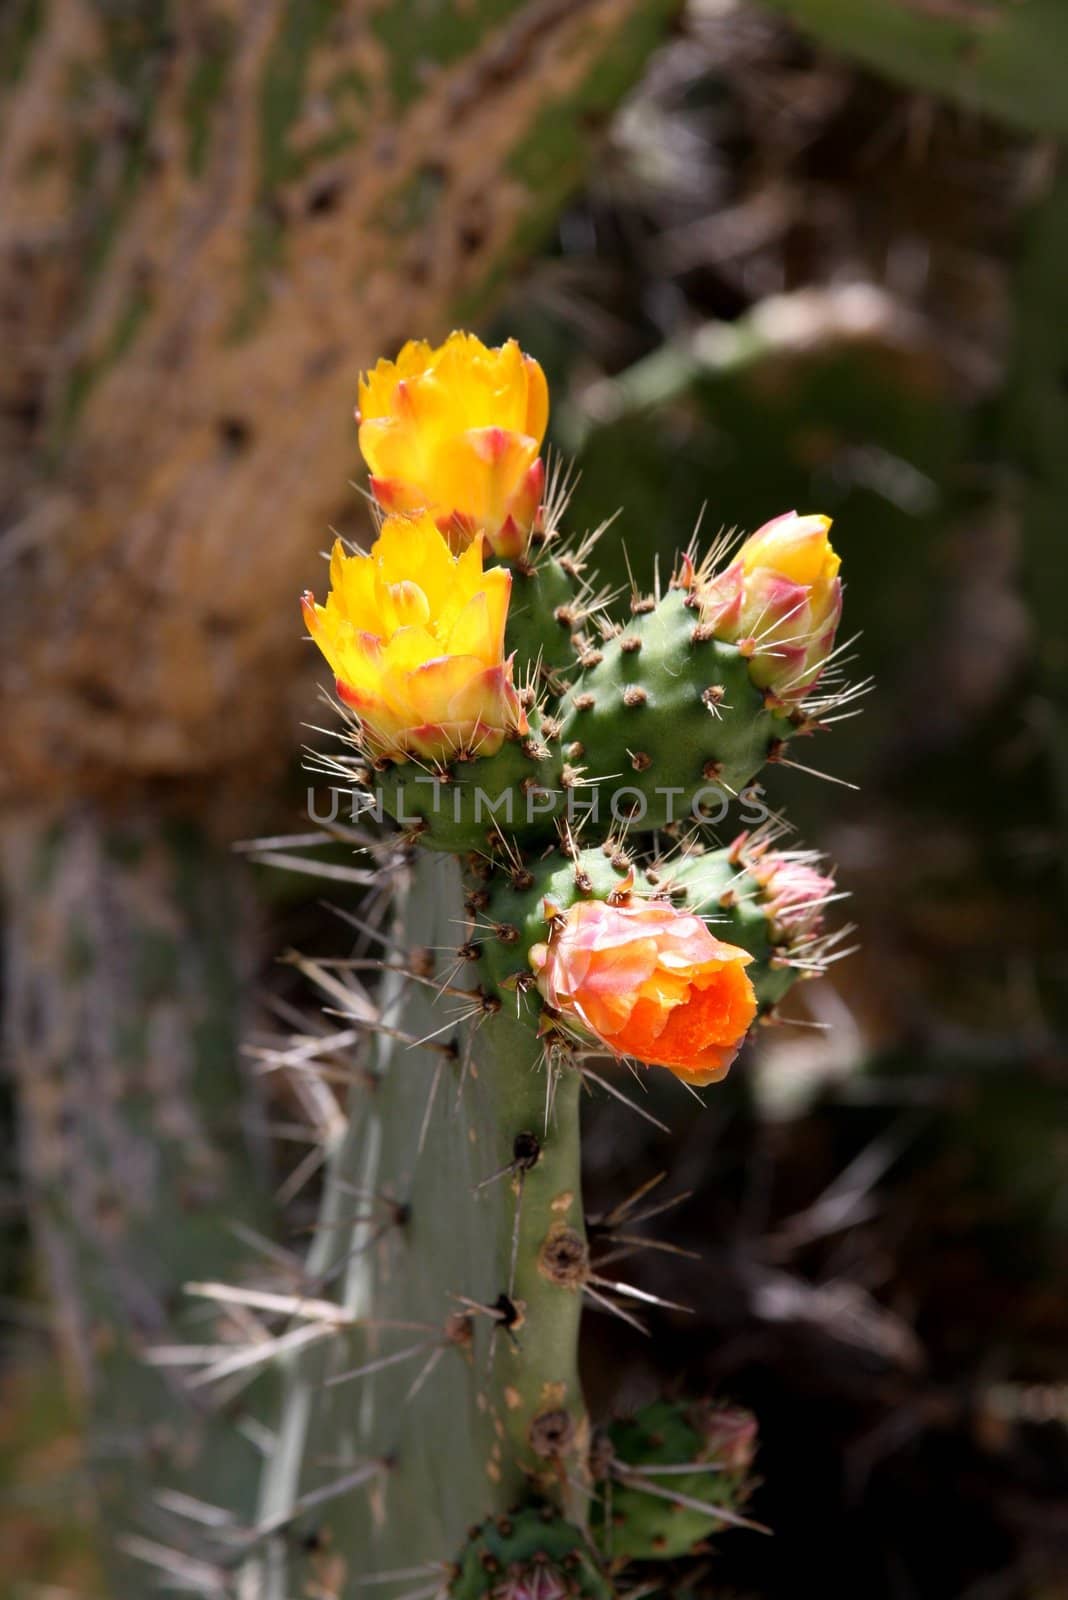 Blooming cactus plant with yellow and orange colors